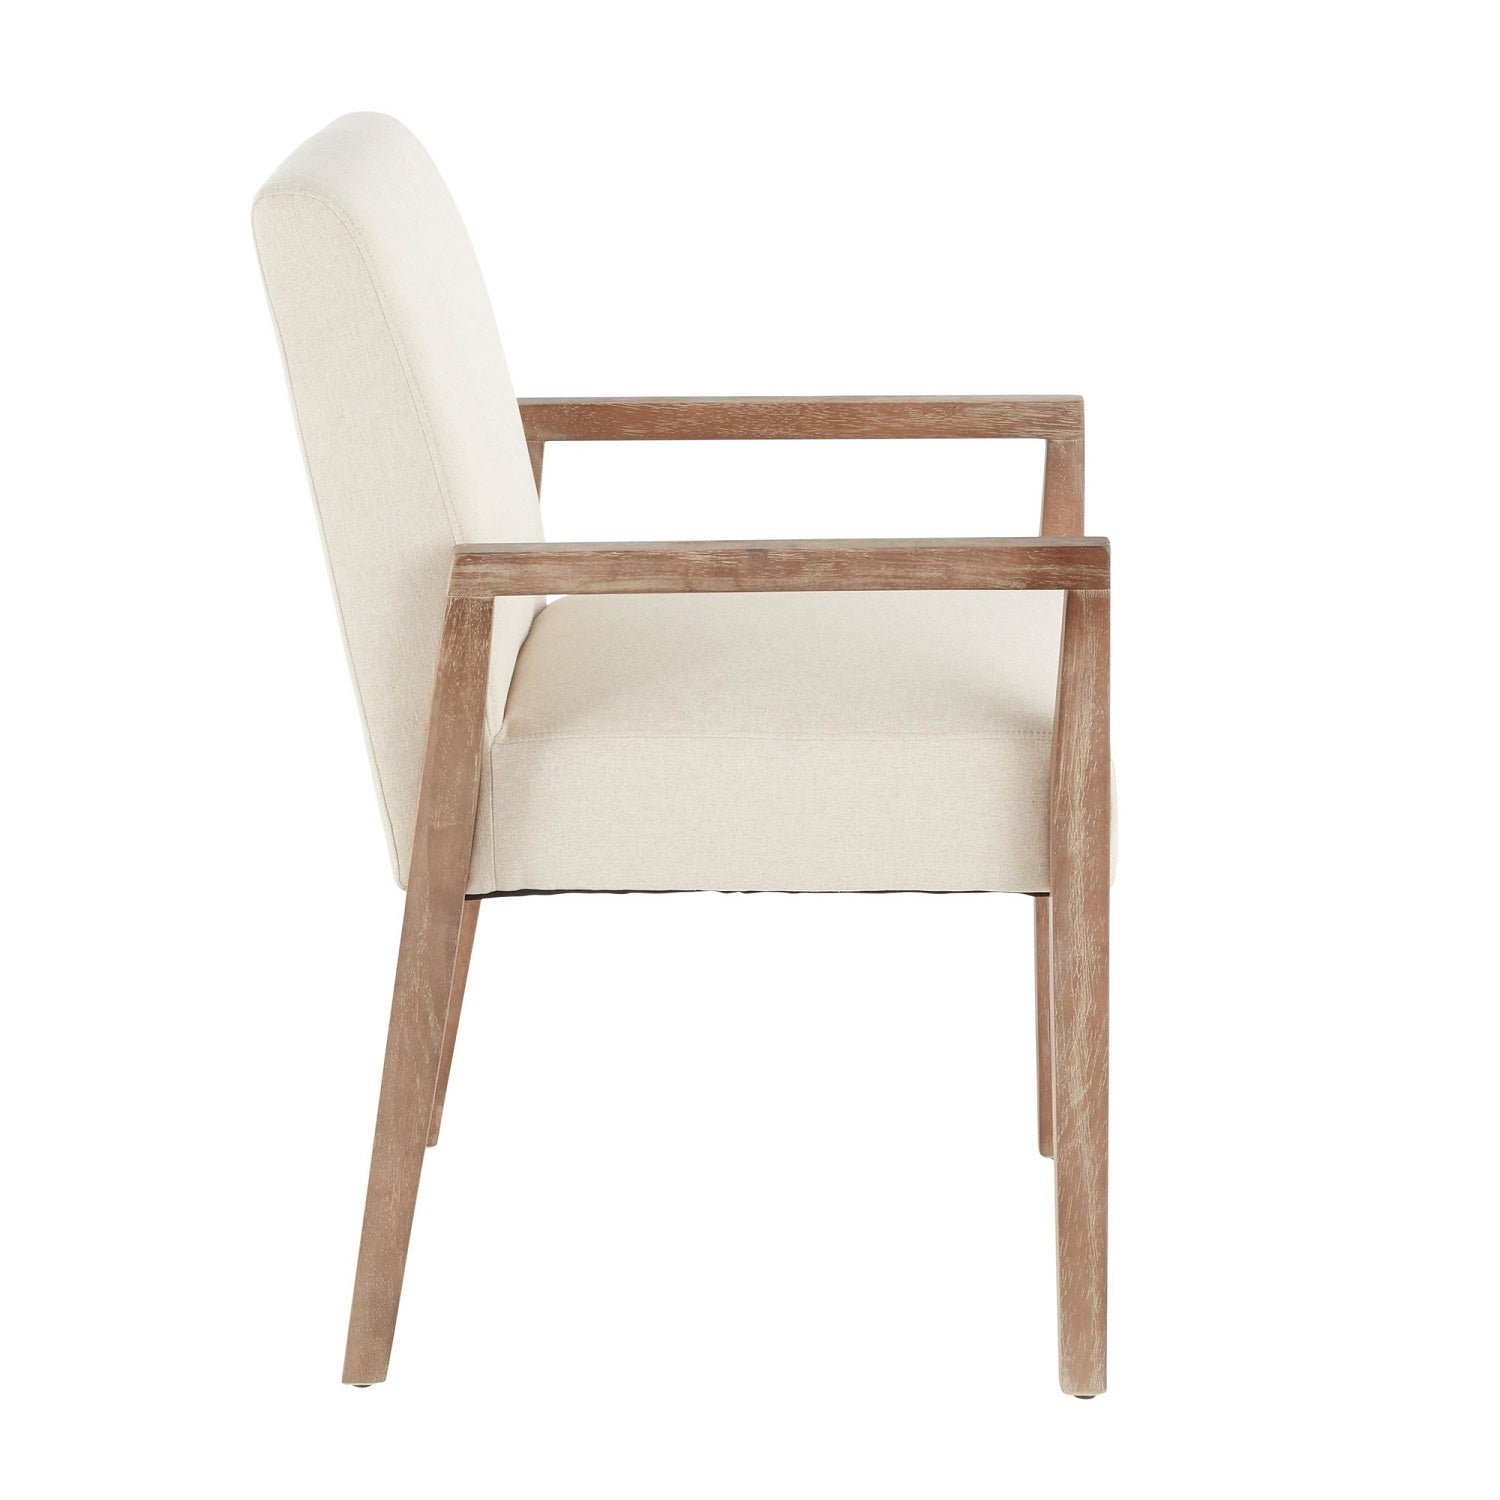 White Washed Arm Chair